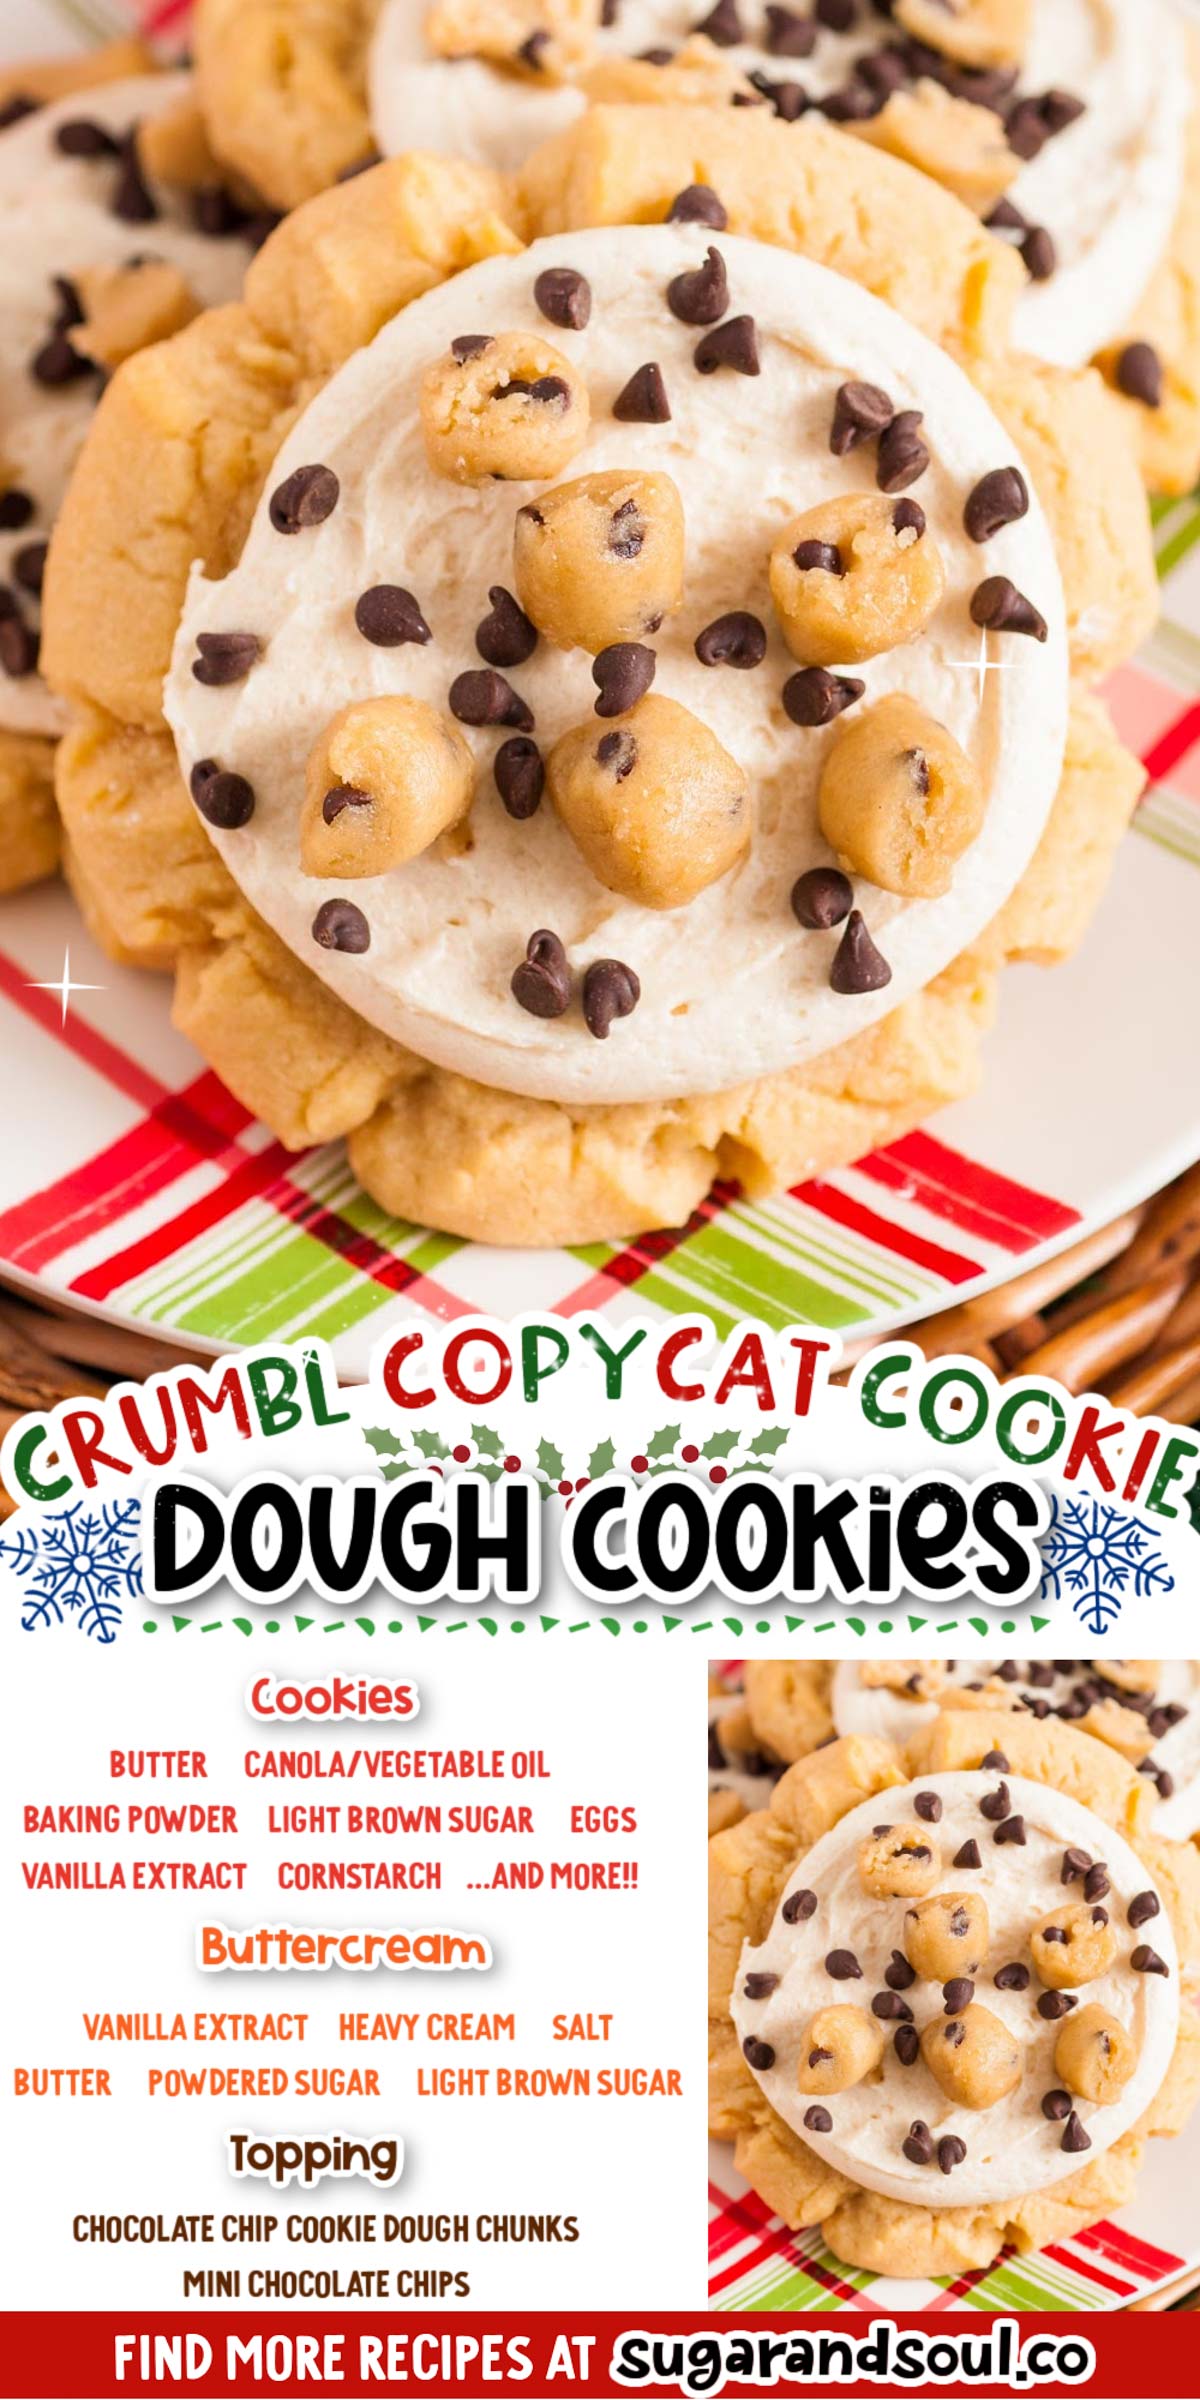 This Cookie Dough Cookies Crumbl copycat recipe makes rich, sweet cookies that are topped with buttercream frosting and edible cookie dough! Make a batch from start to finish in just over an hour! via @sugarandsoulco